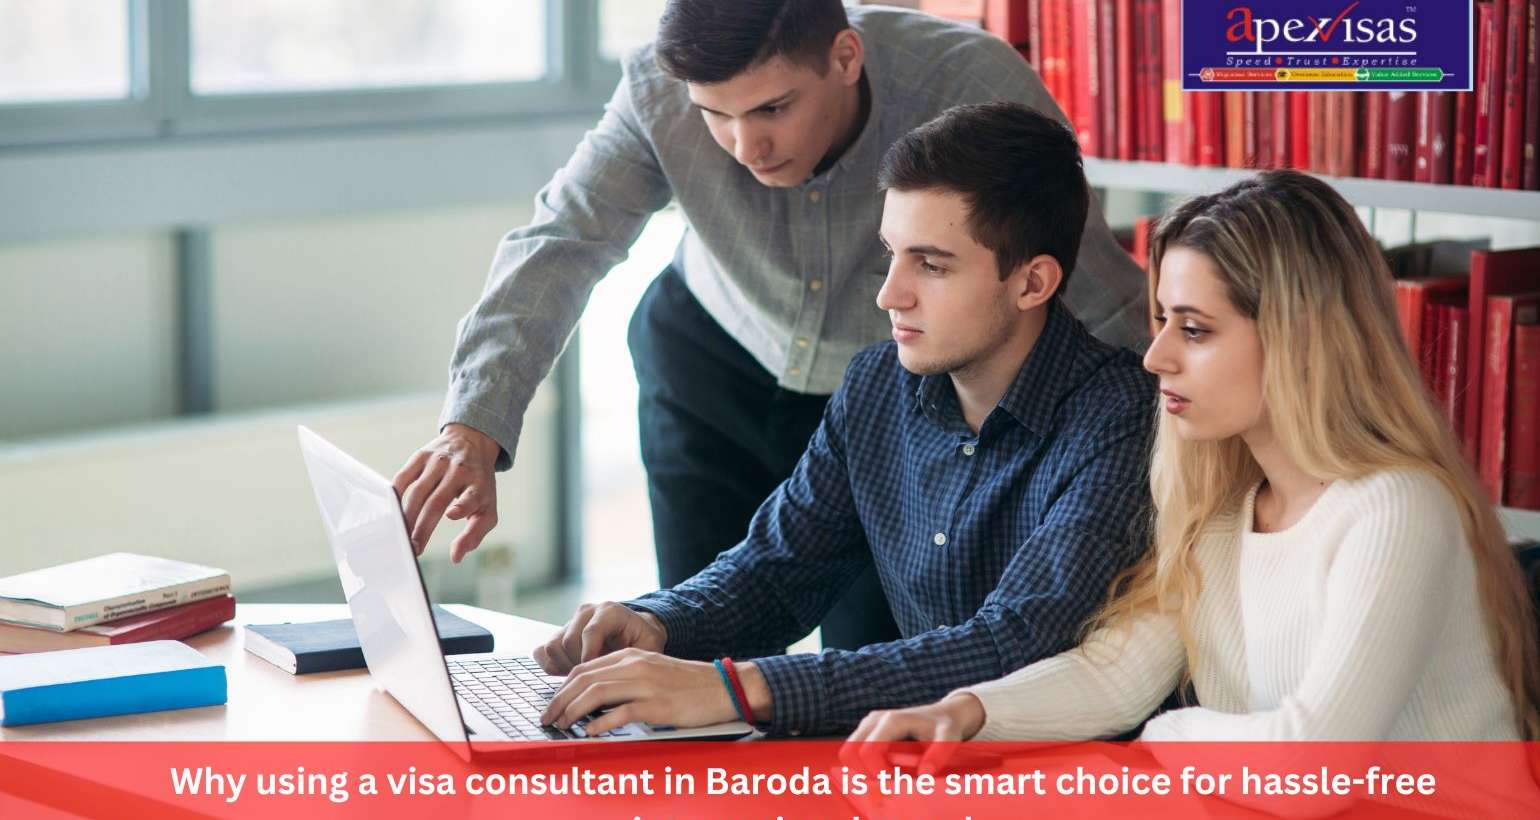 Why using a visa consultant in Baroda is the smart choice for hassle-free international travel